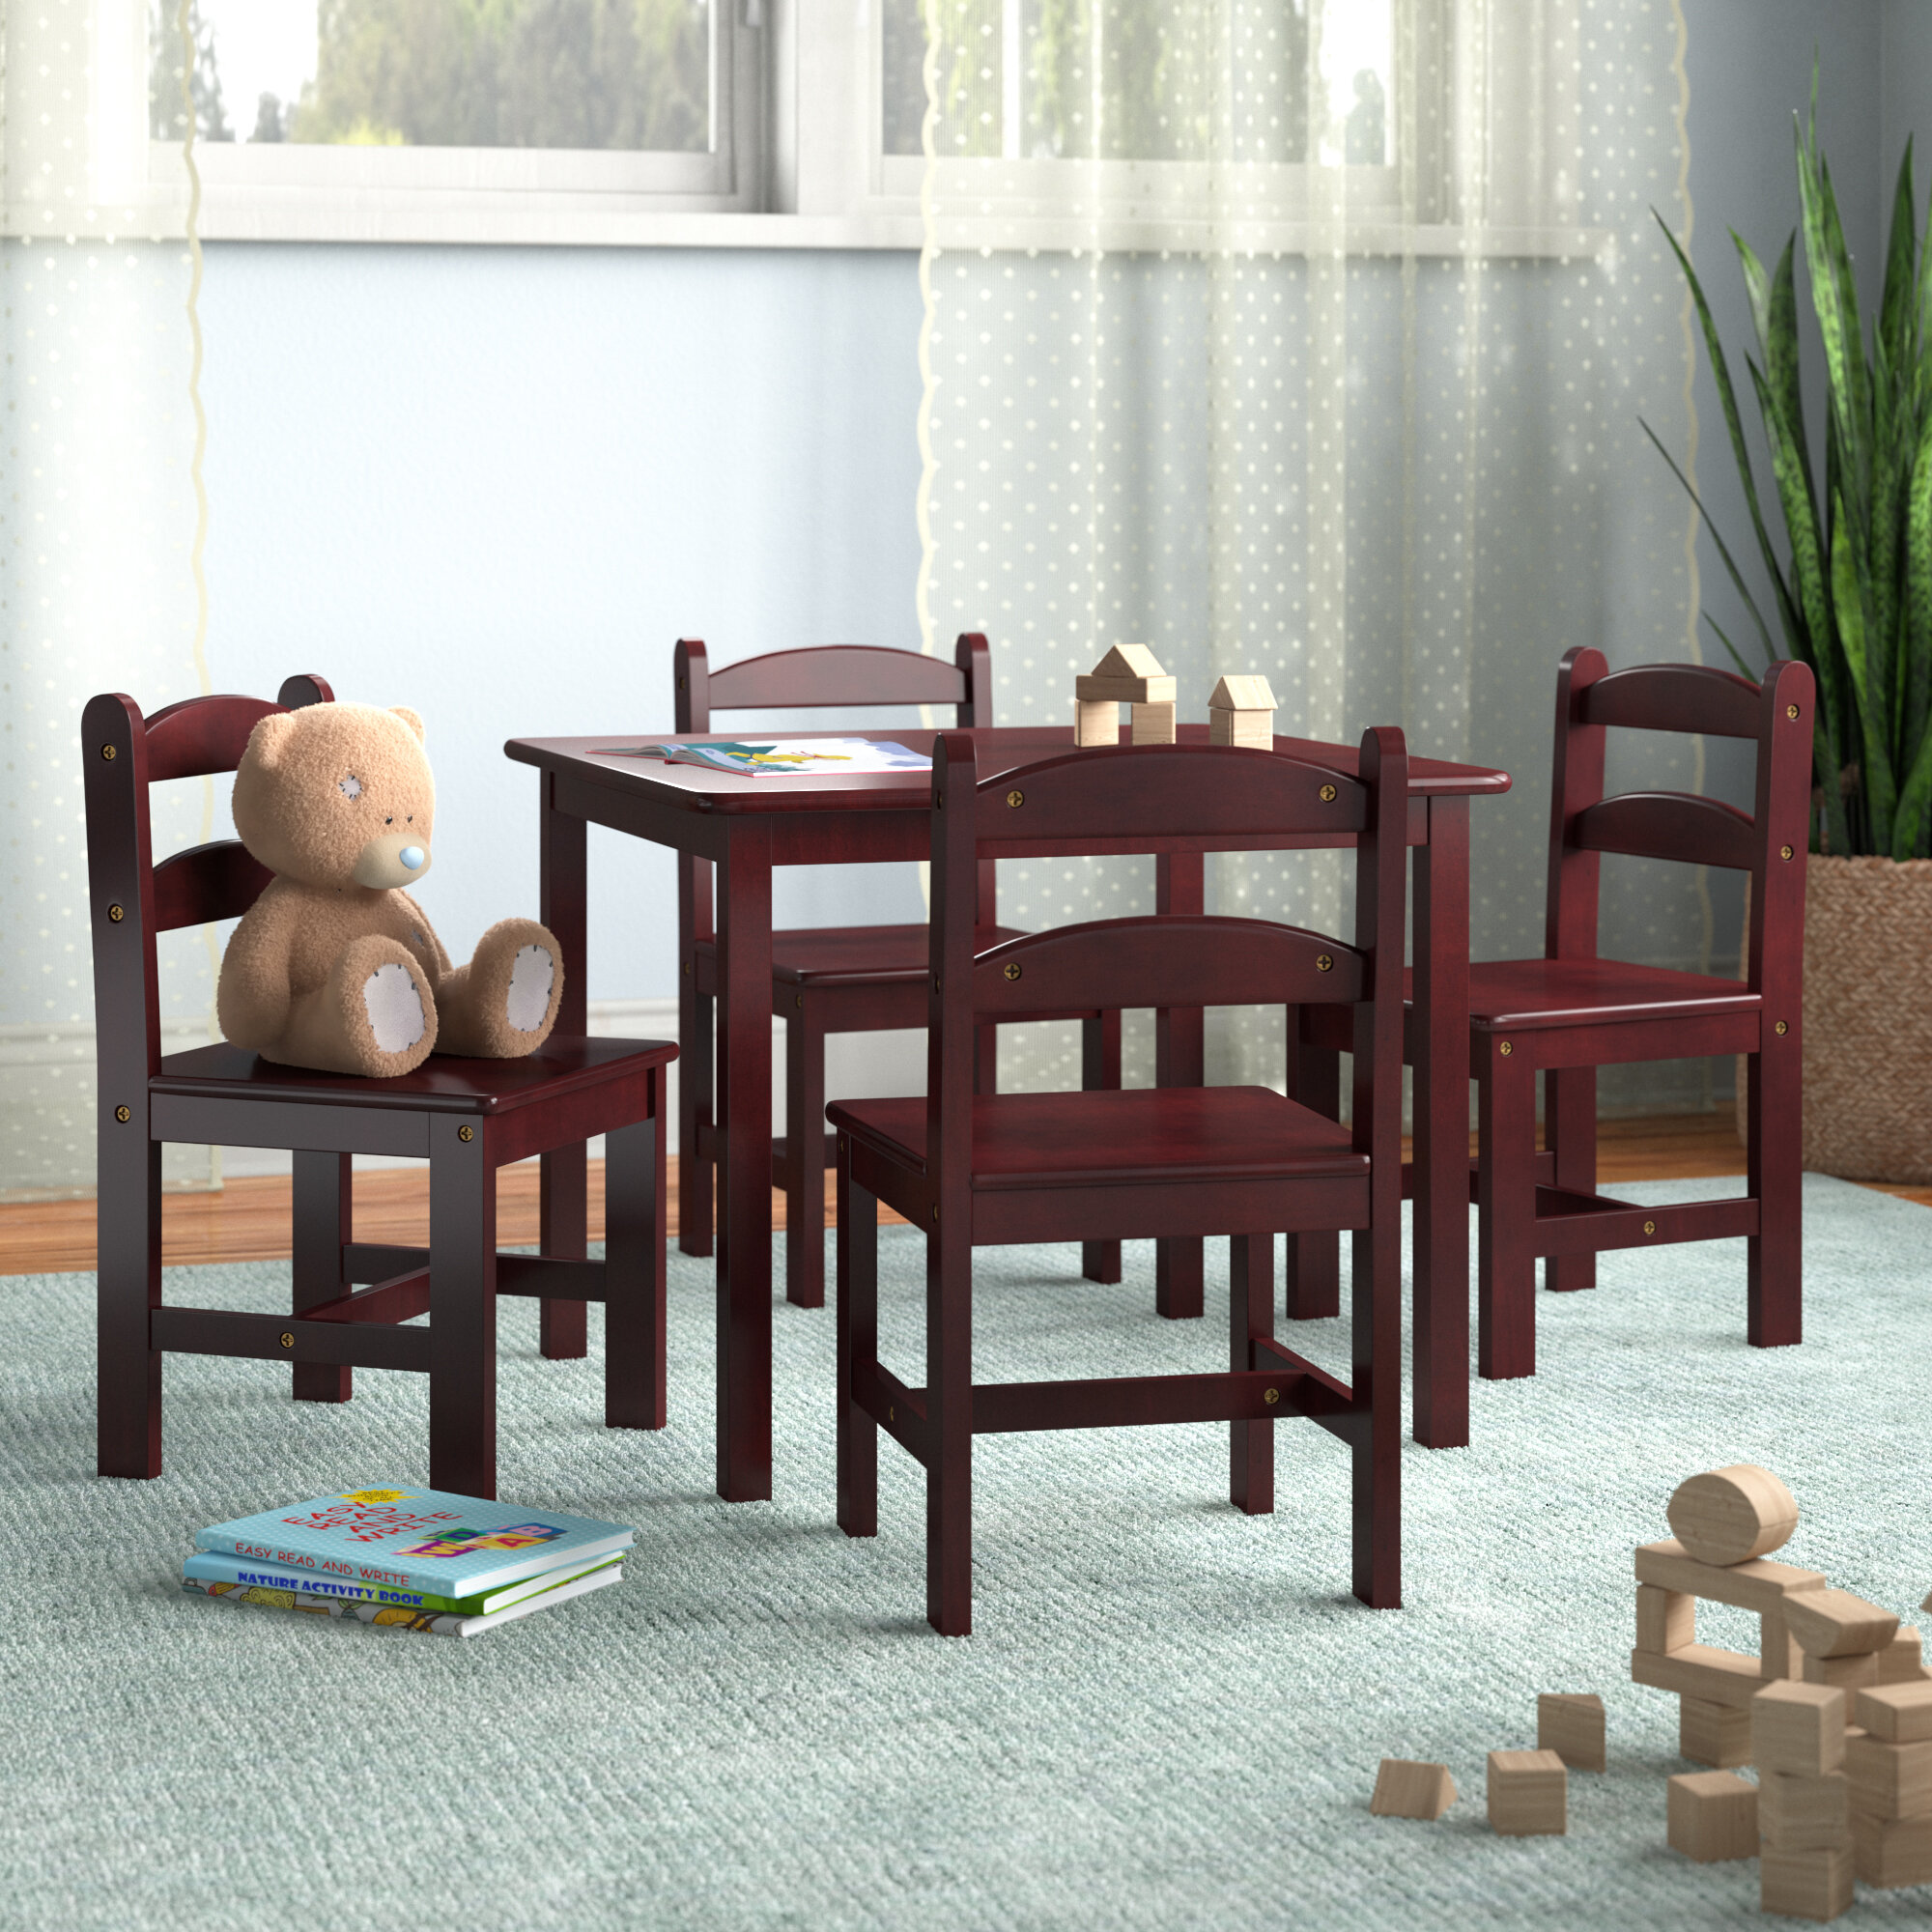 Wooden Table Chair Toy  - We Made Them Out Of Tree Branches From The.